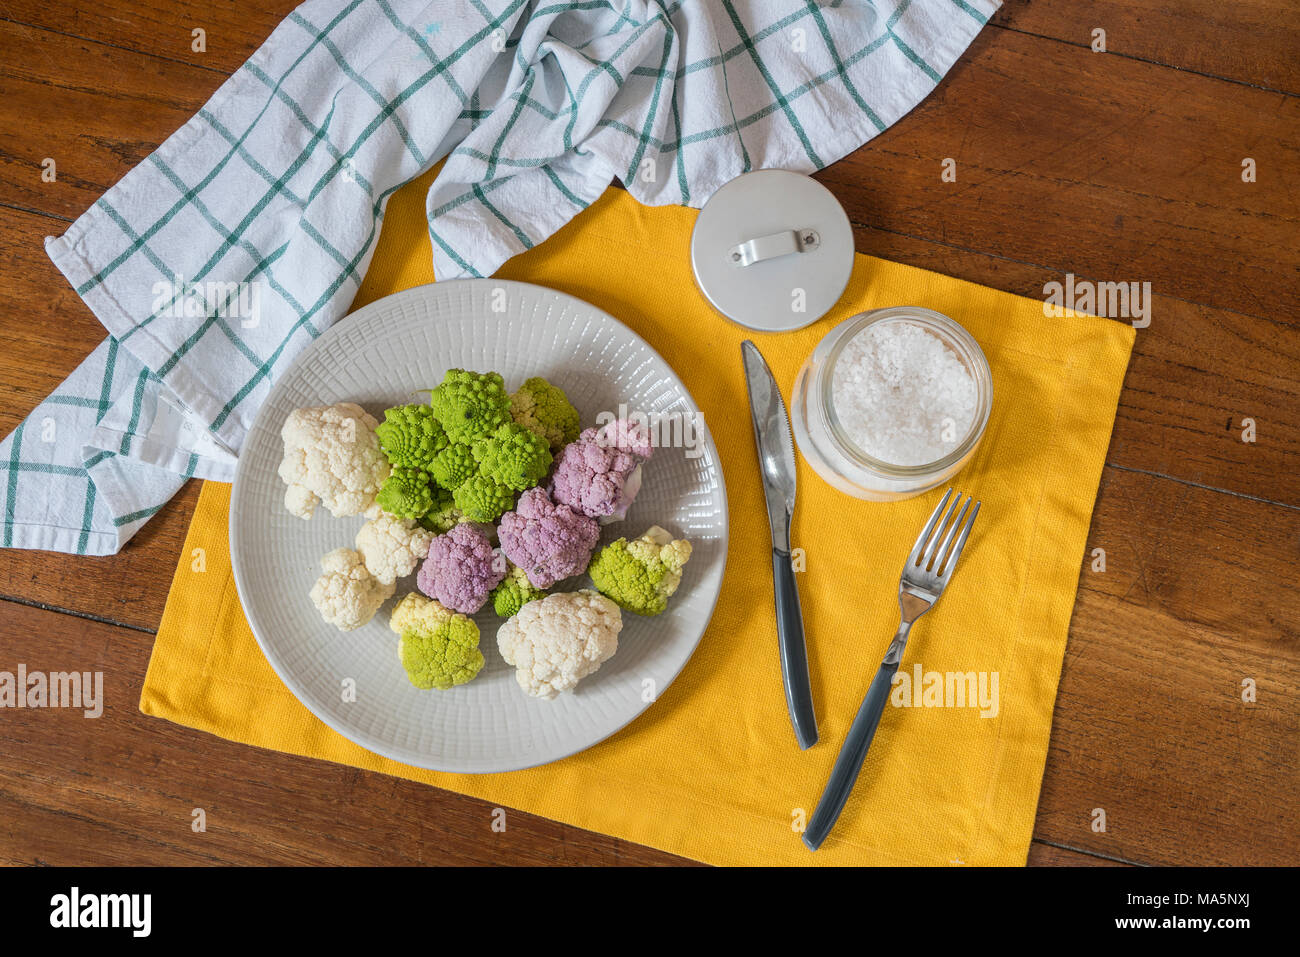 White, pink and green cauliflower on a plate on a wooden table Stock Photo